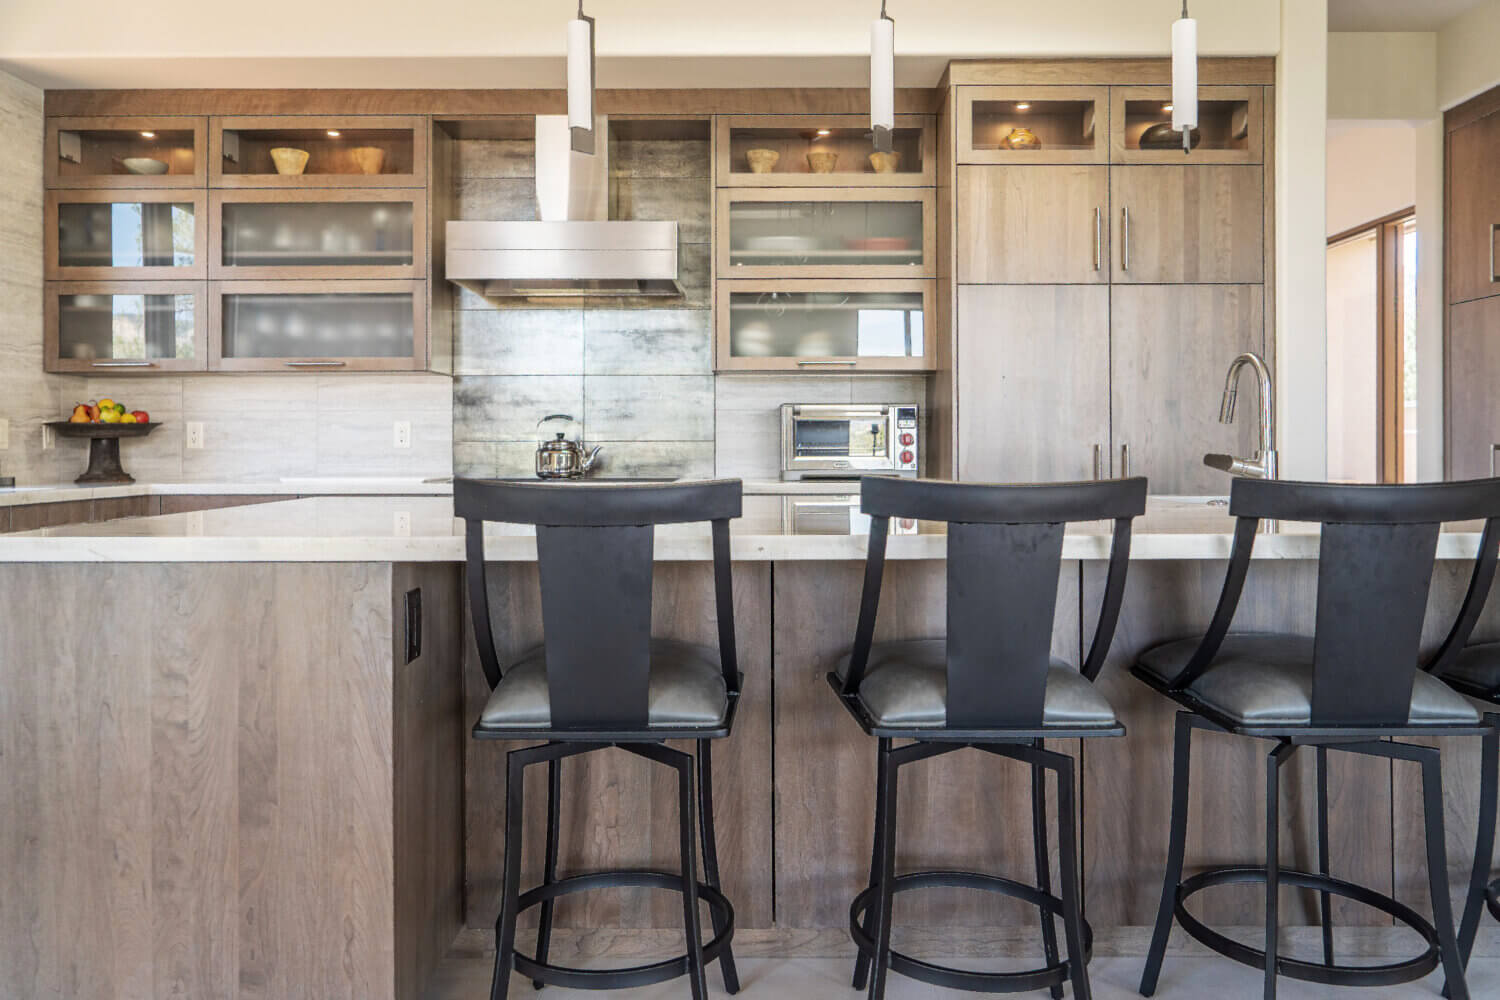 A close up of the contemporary kitchen island with bar stool seating.